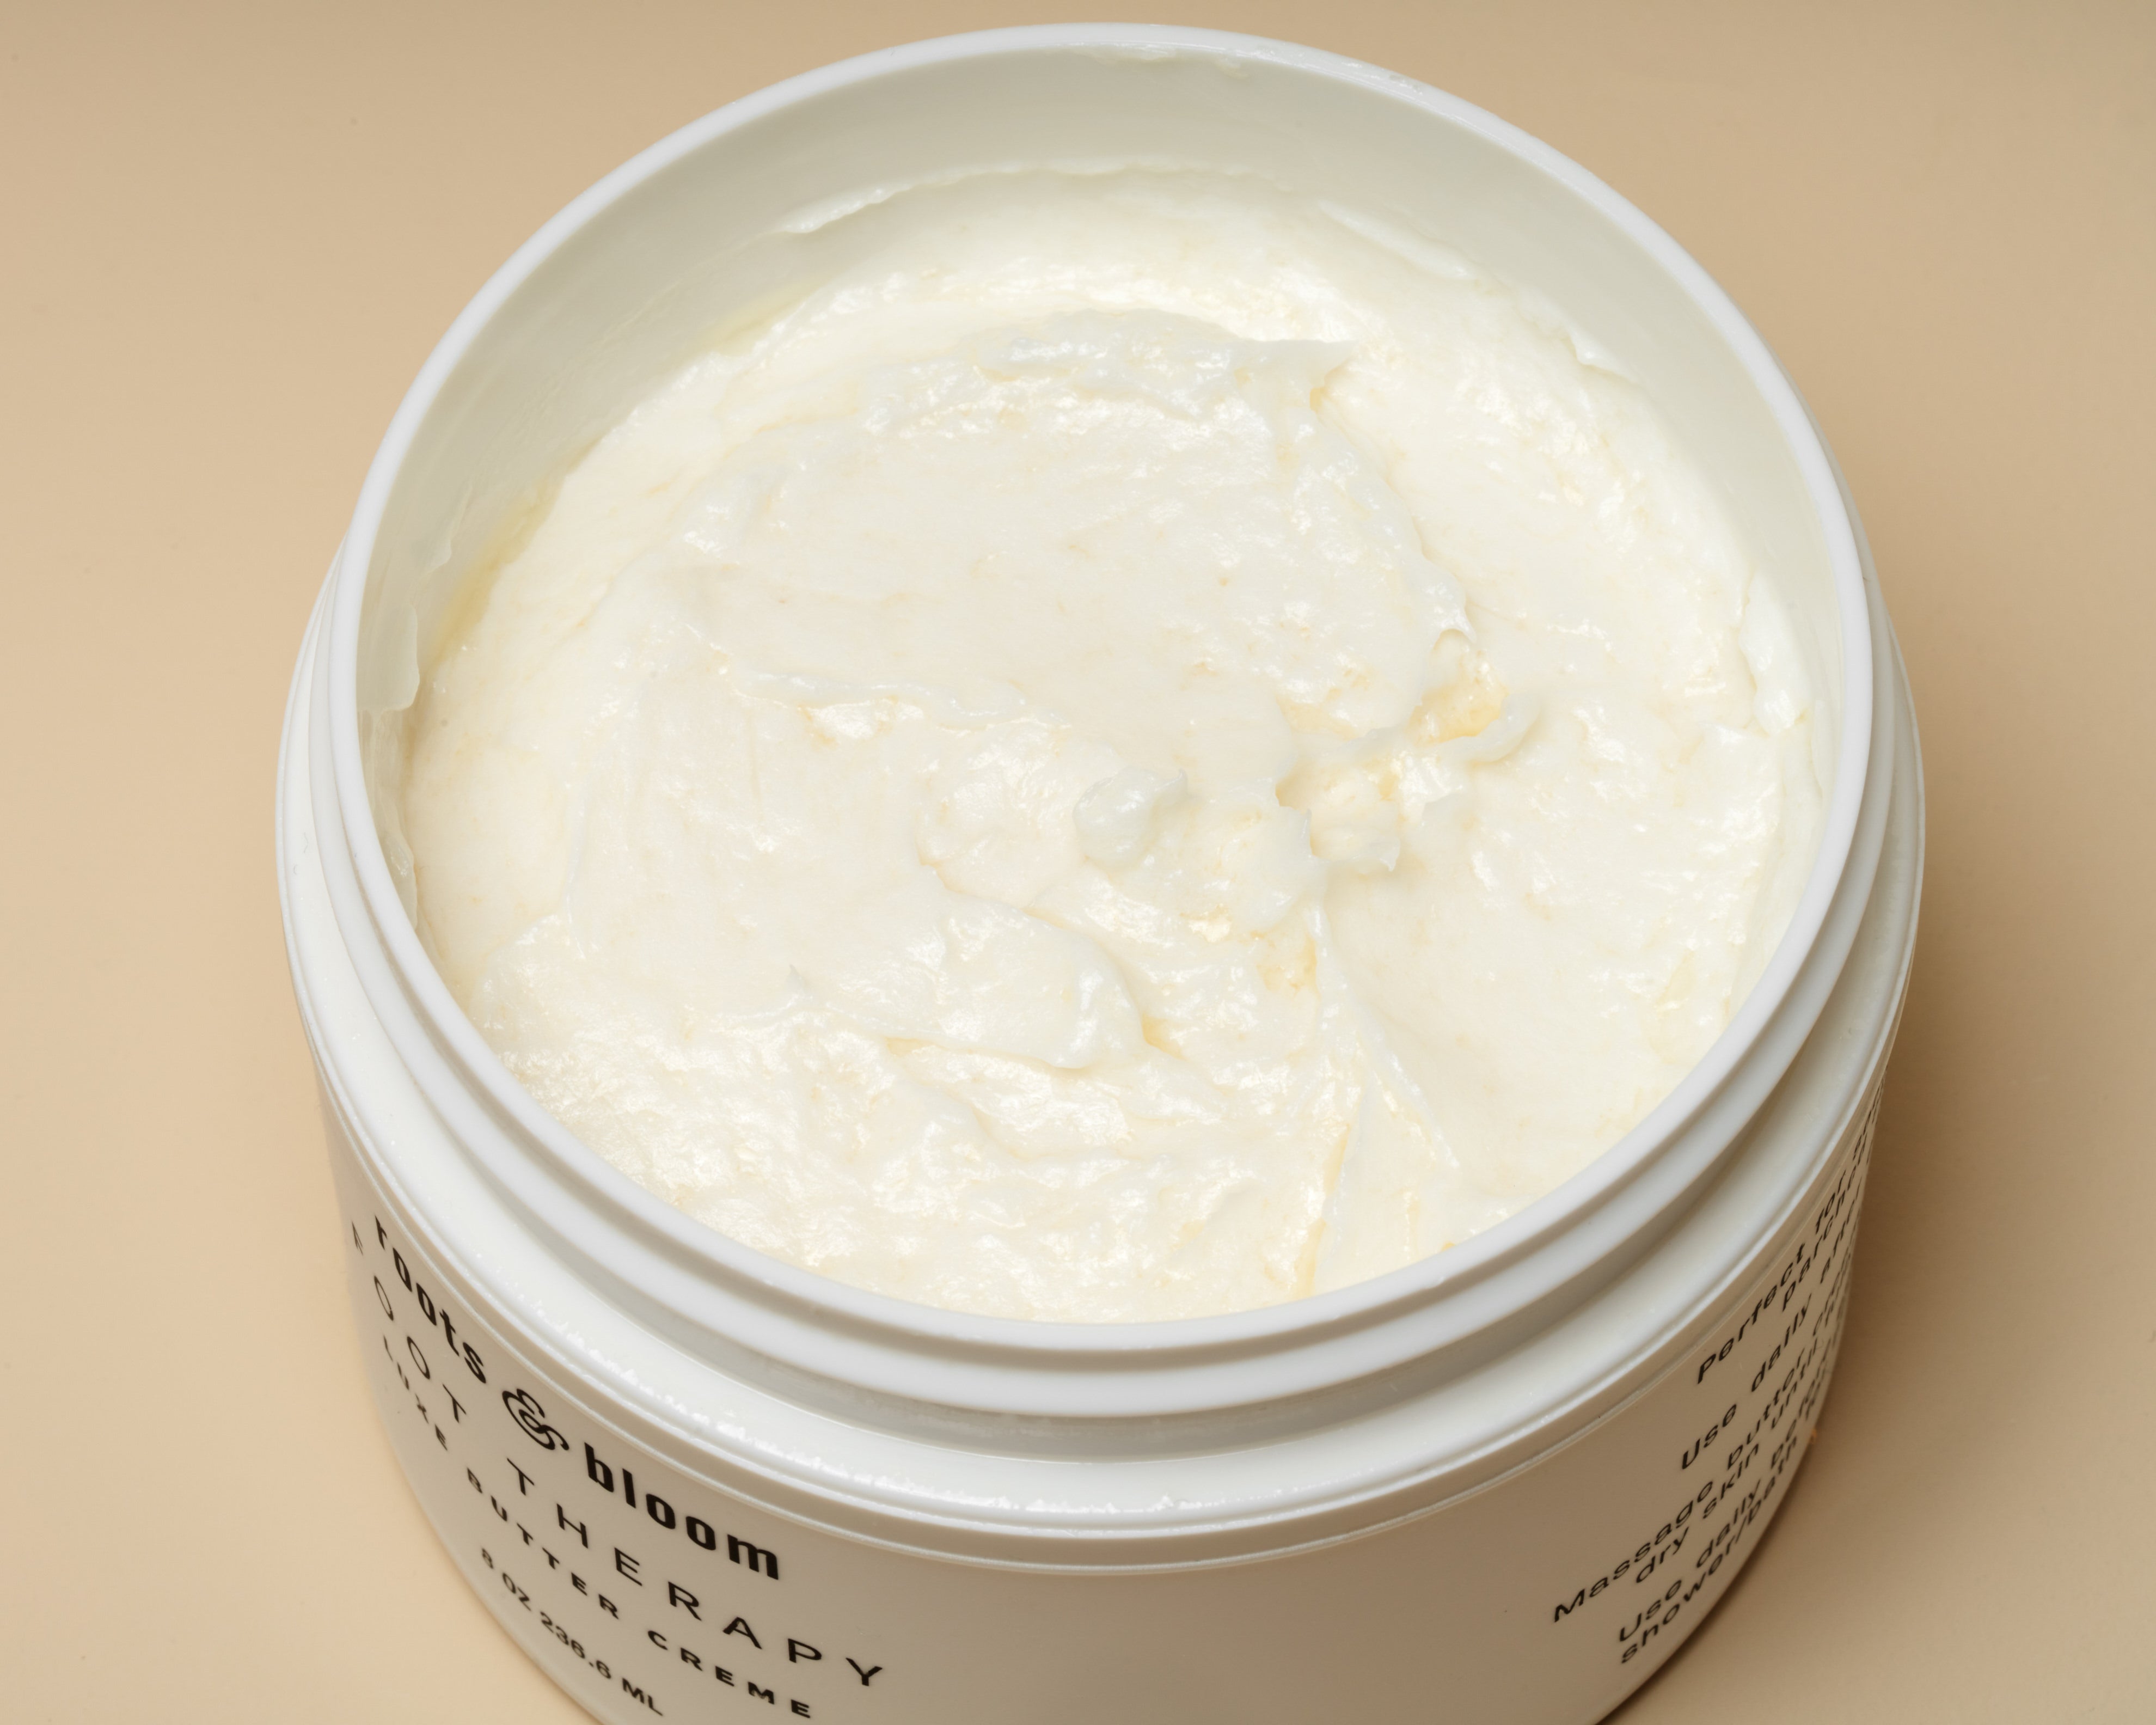 Skin Therapy Luxe Butter Creme